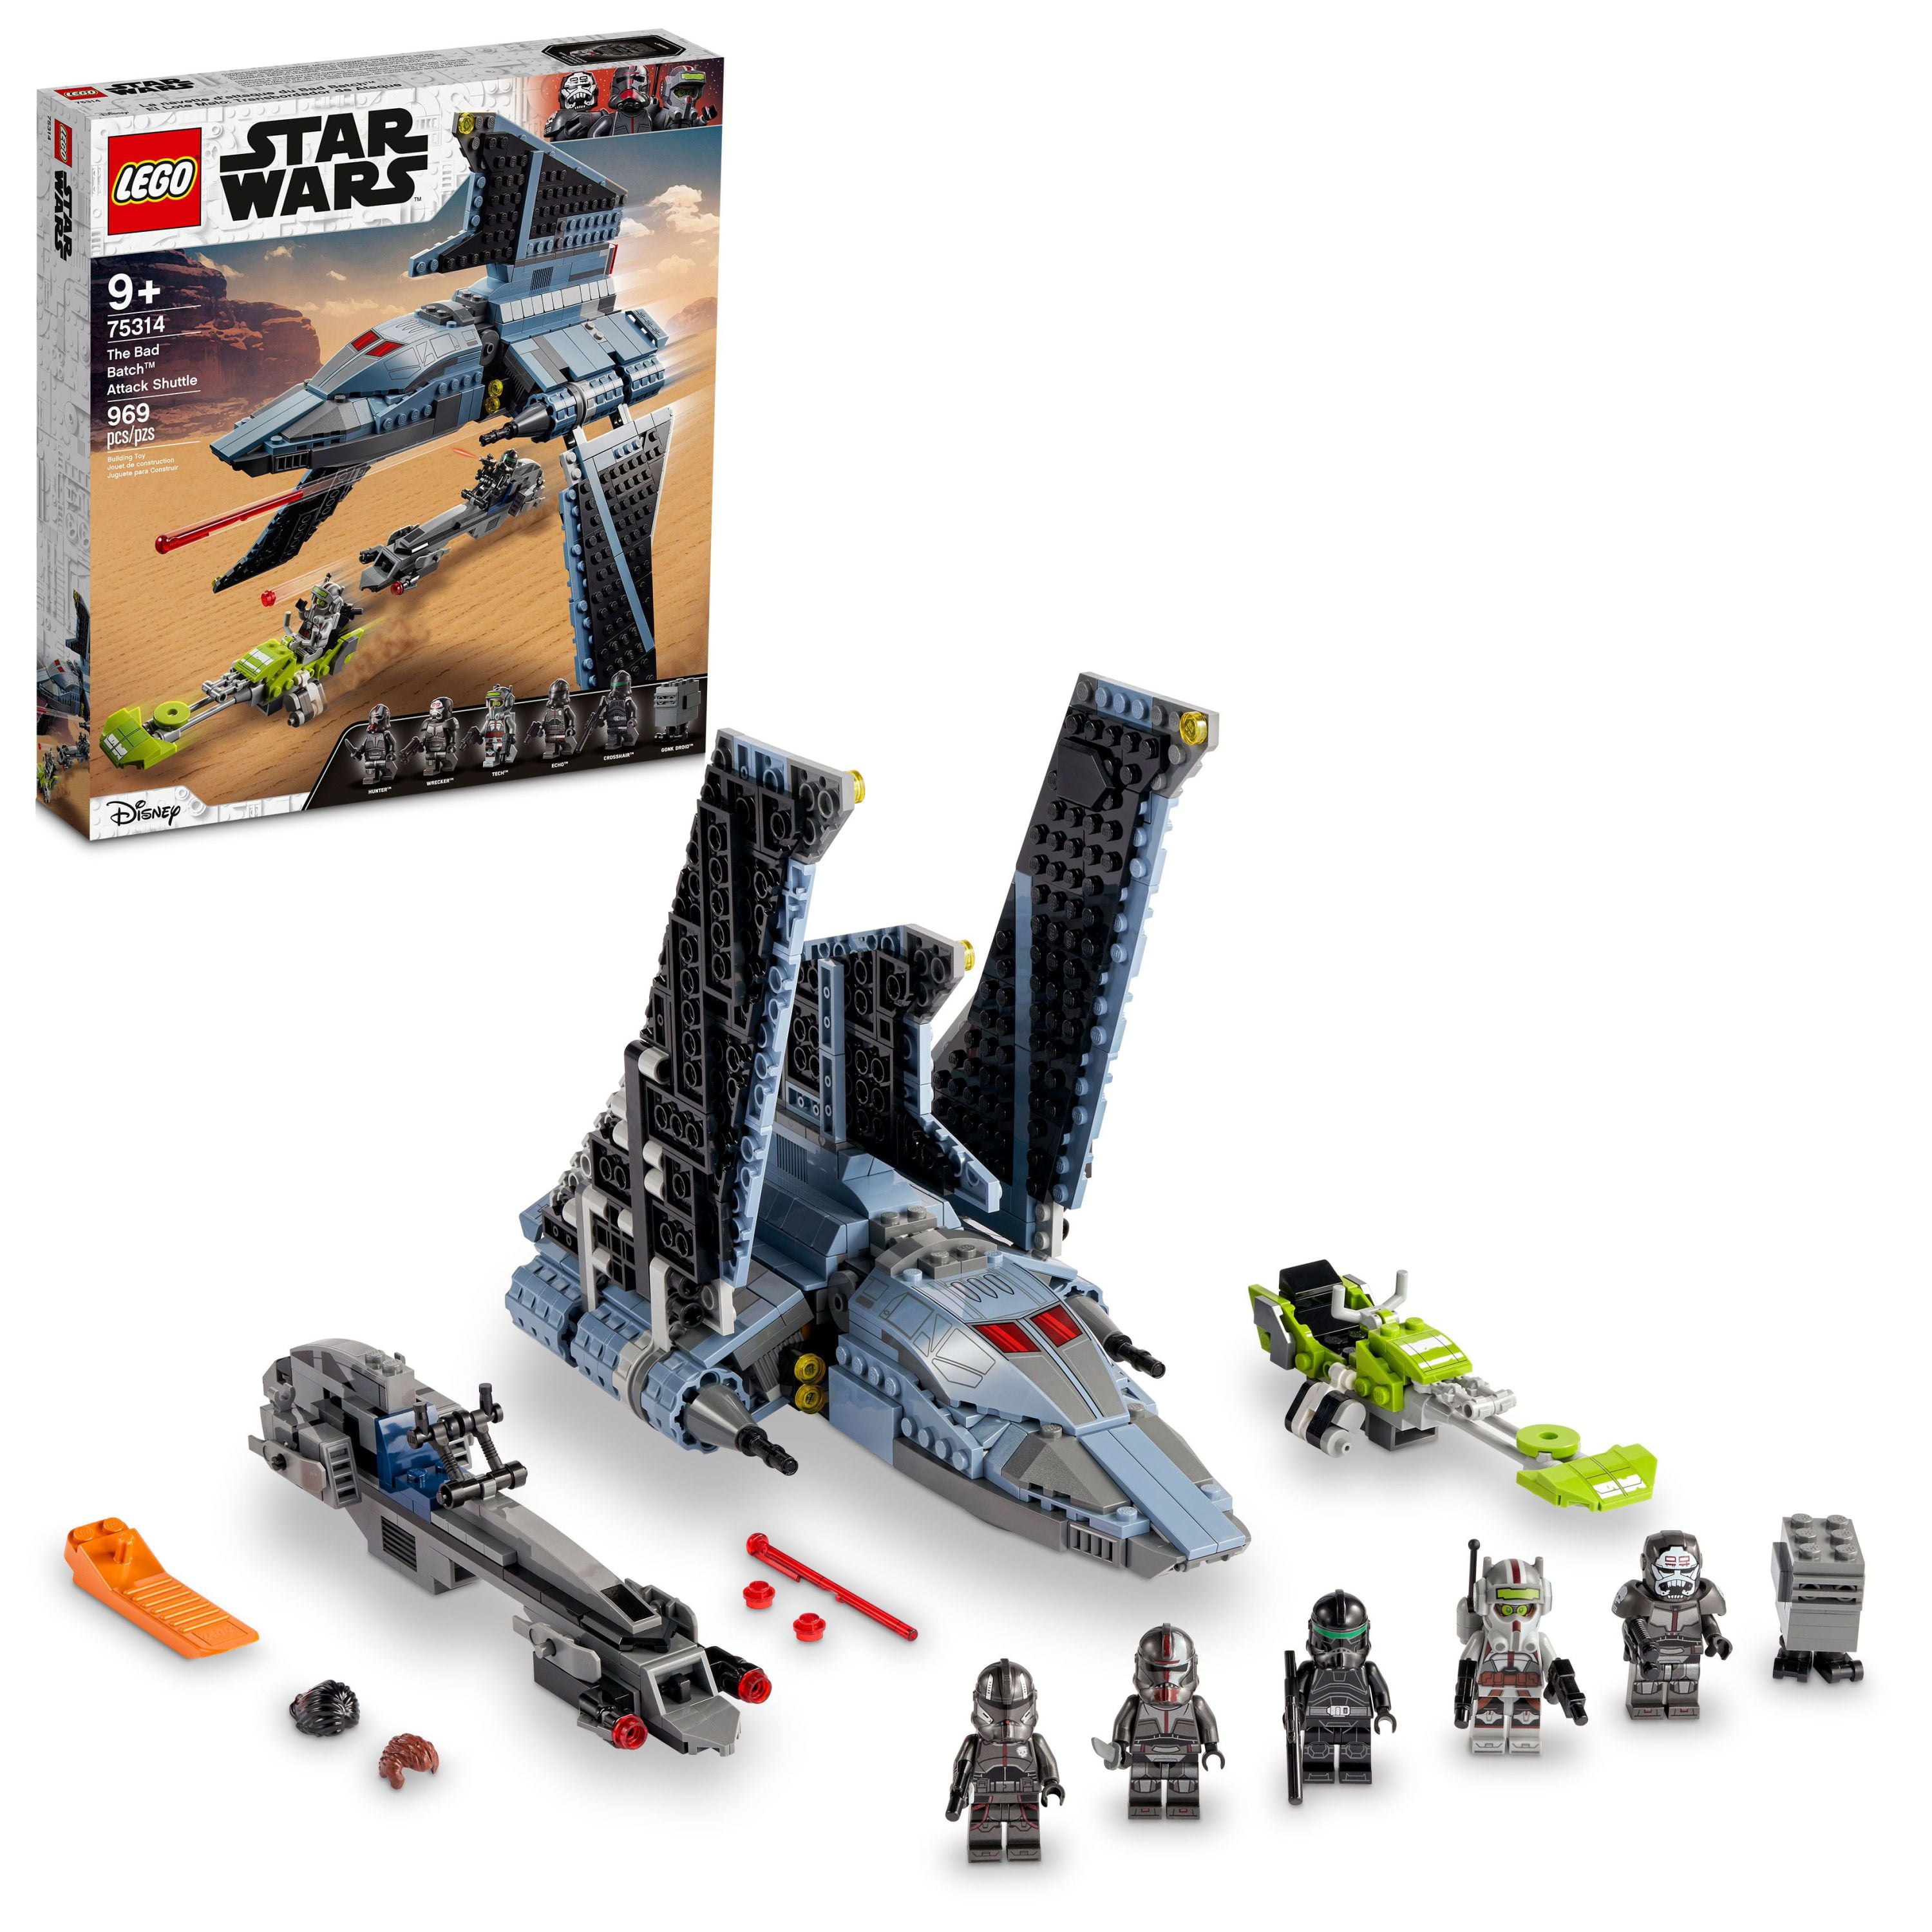 LEGO Star Wars The Bad Batch Attack Shuttle 75314 Building Toy Set (969 Pieces) $70 + Free Shipping